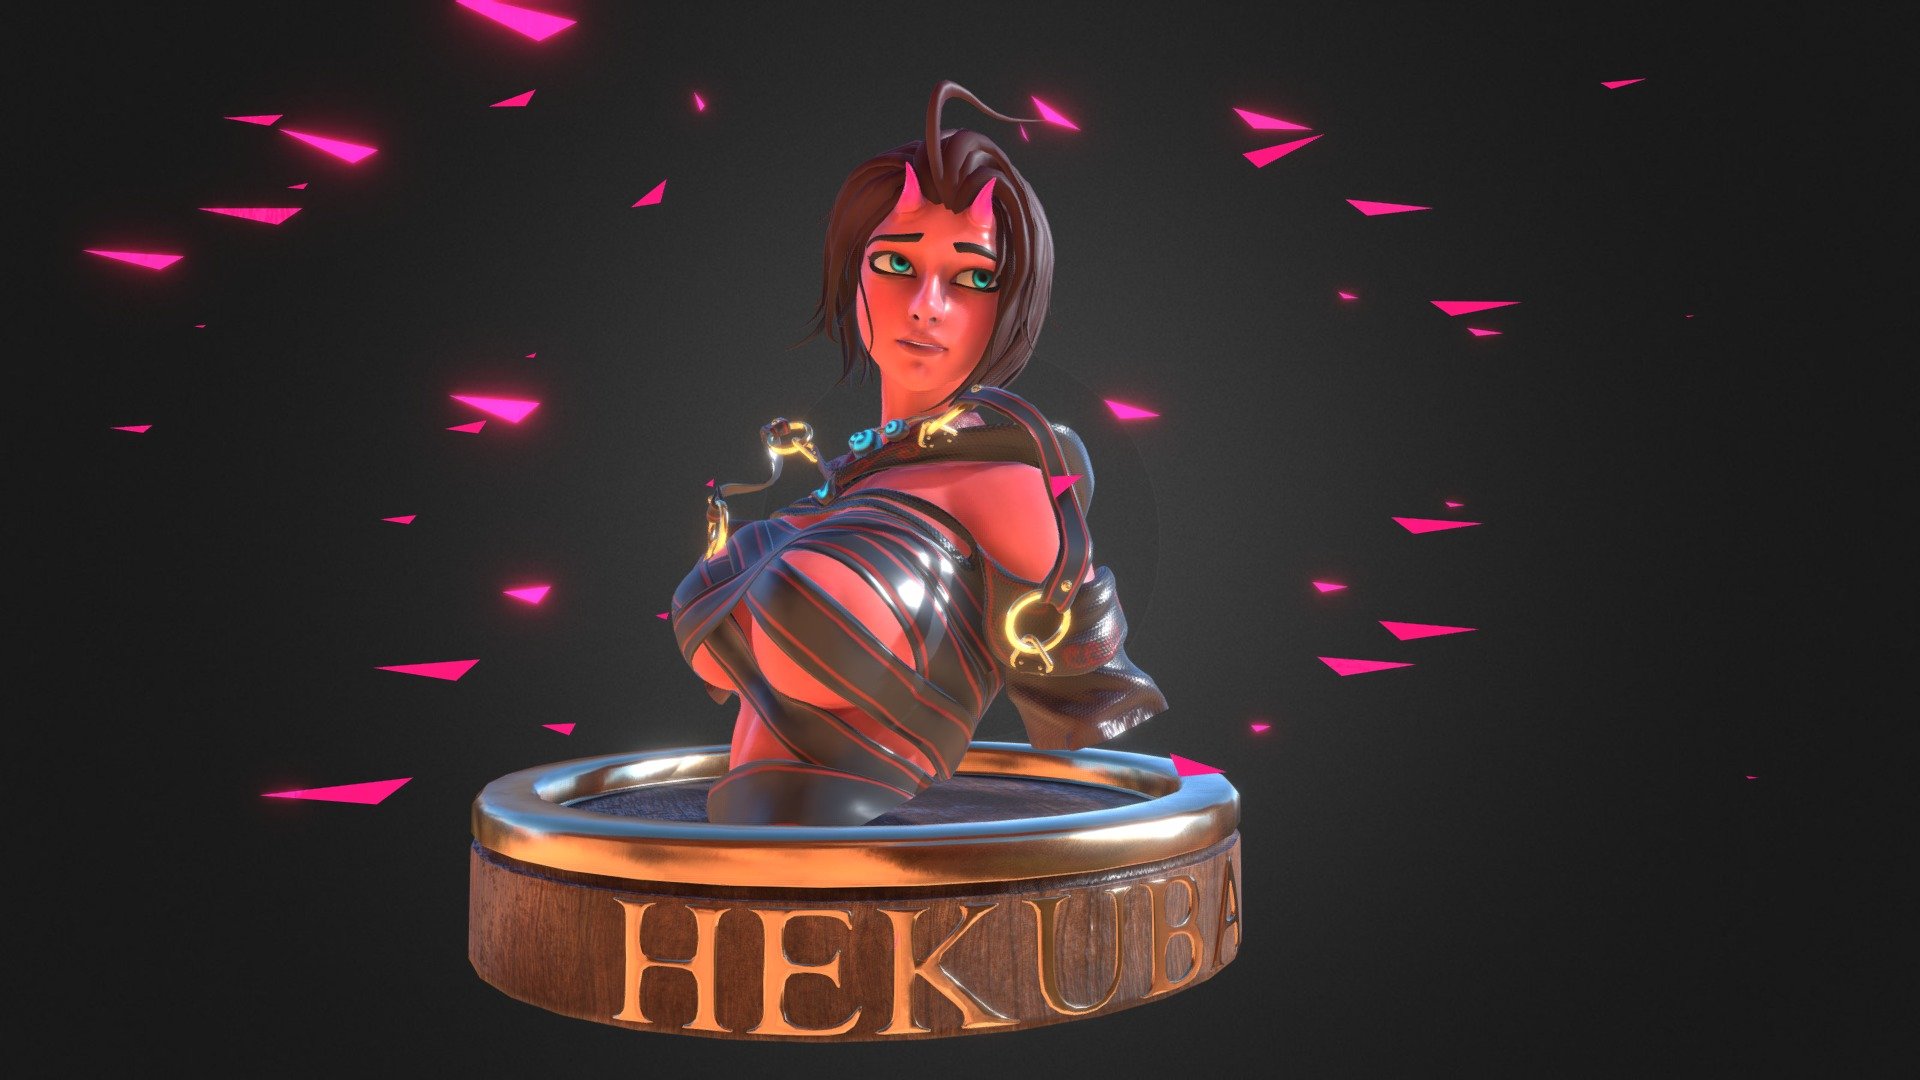 Check out my Twitter!! https://twitter.com/MaycoNigel

Hekuba is an original character set on a Fantasy Post-Apocalyptic World. She will share more of her adventures with us in the future!

Check her out in VR and AR!

The model isnt optimized, I have used ZRemesher and some manual Retopology, the UVs also are automatic (some of them). The objective of this project was to practice a friendly workflow, in wich I will start to integrate Manual retopology, UV mapping, Texturing and Rigging in a more slow and friendly way 3d model